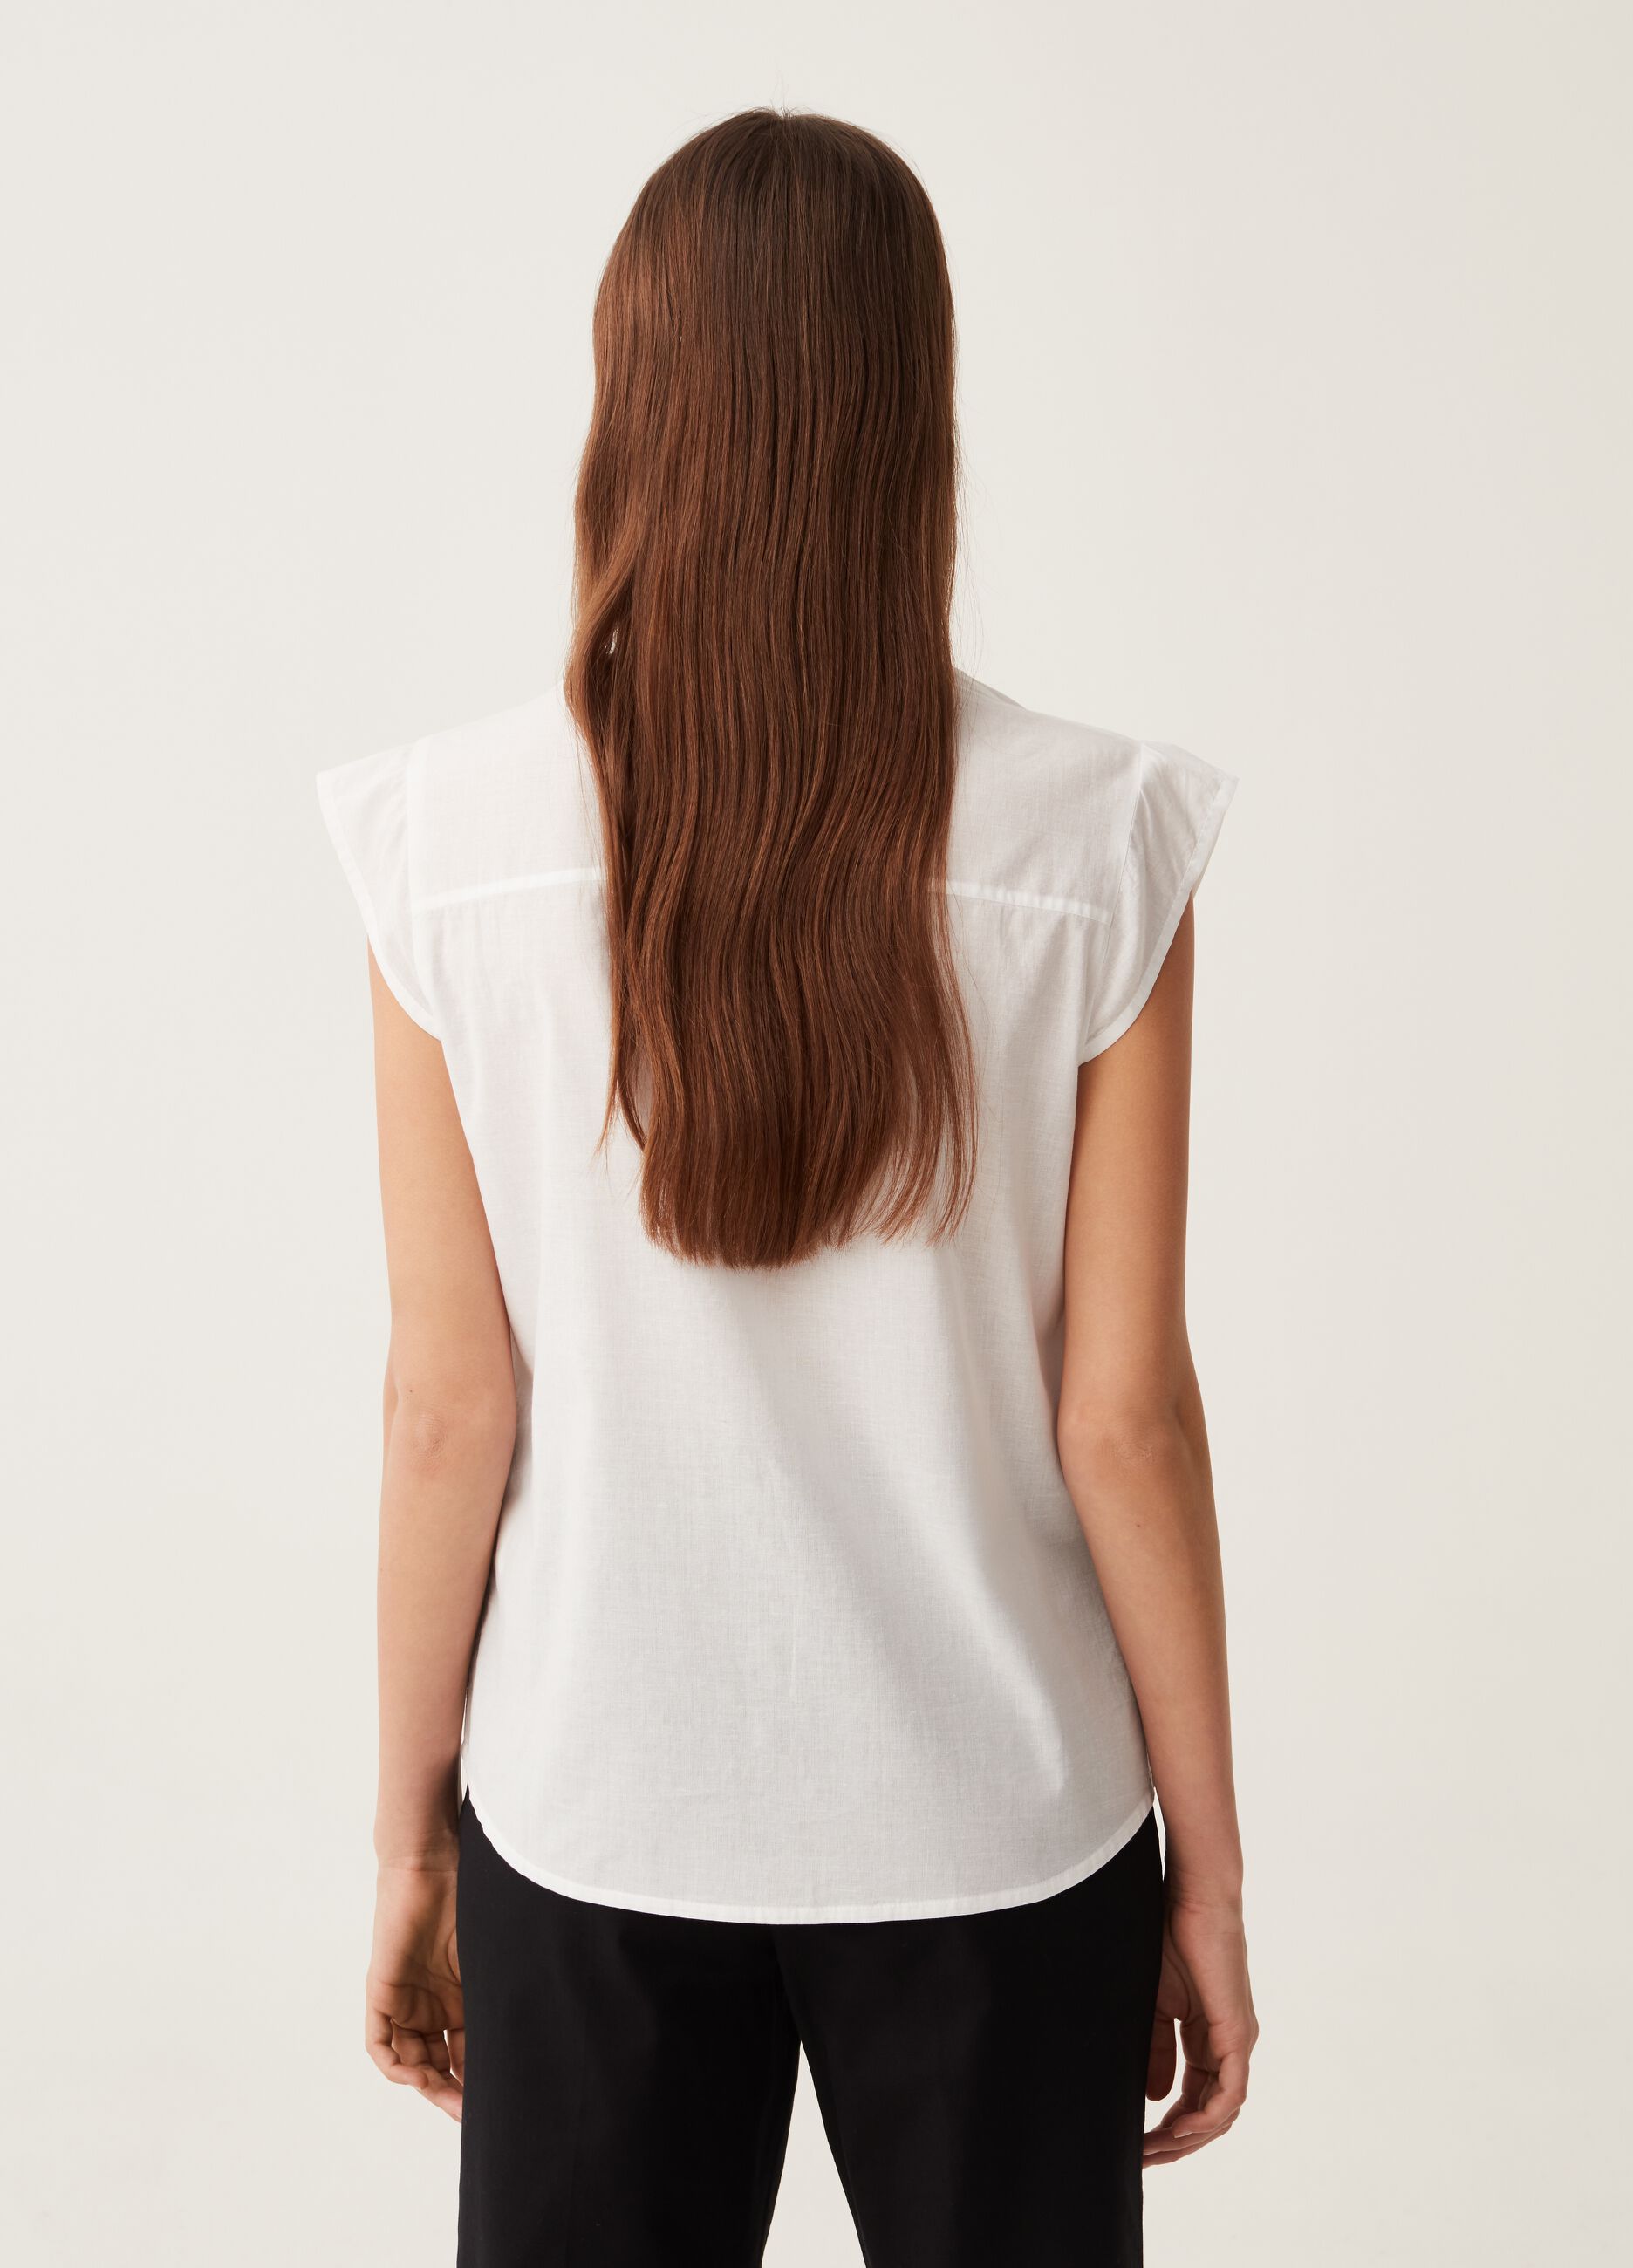 Cotton shirt with cap sleeves